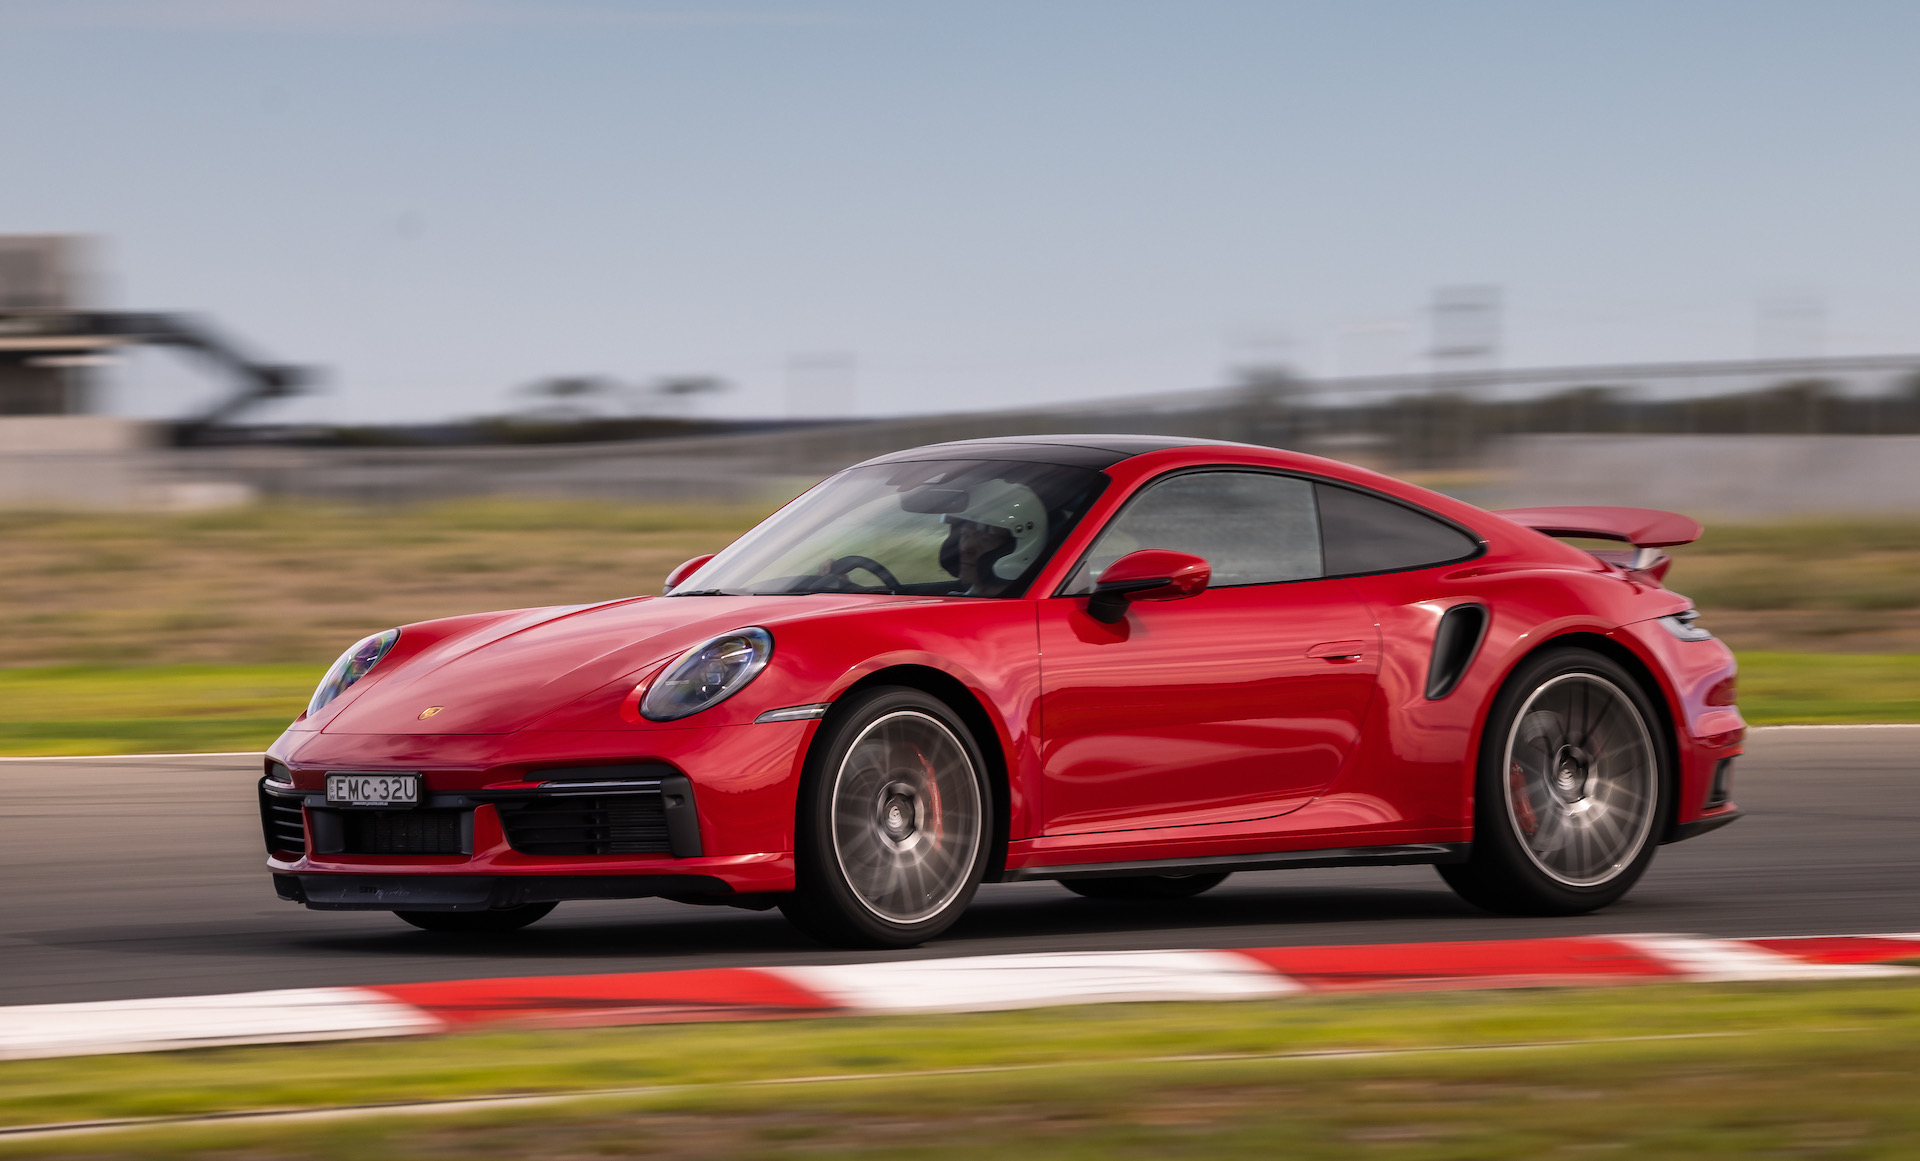 New Porsche 911 Turbo resets lap record at The Bend (video)